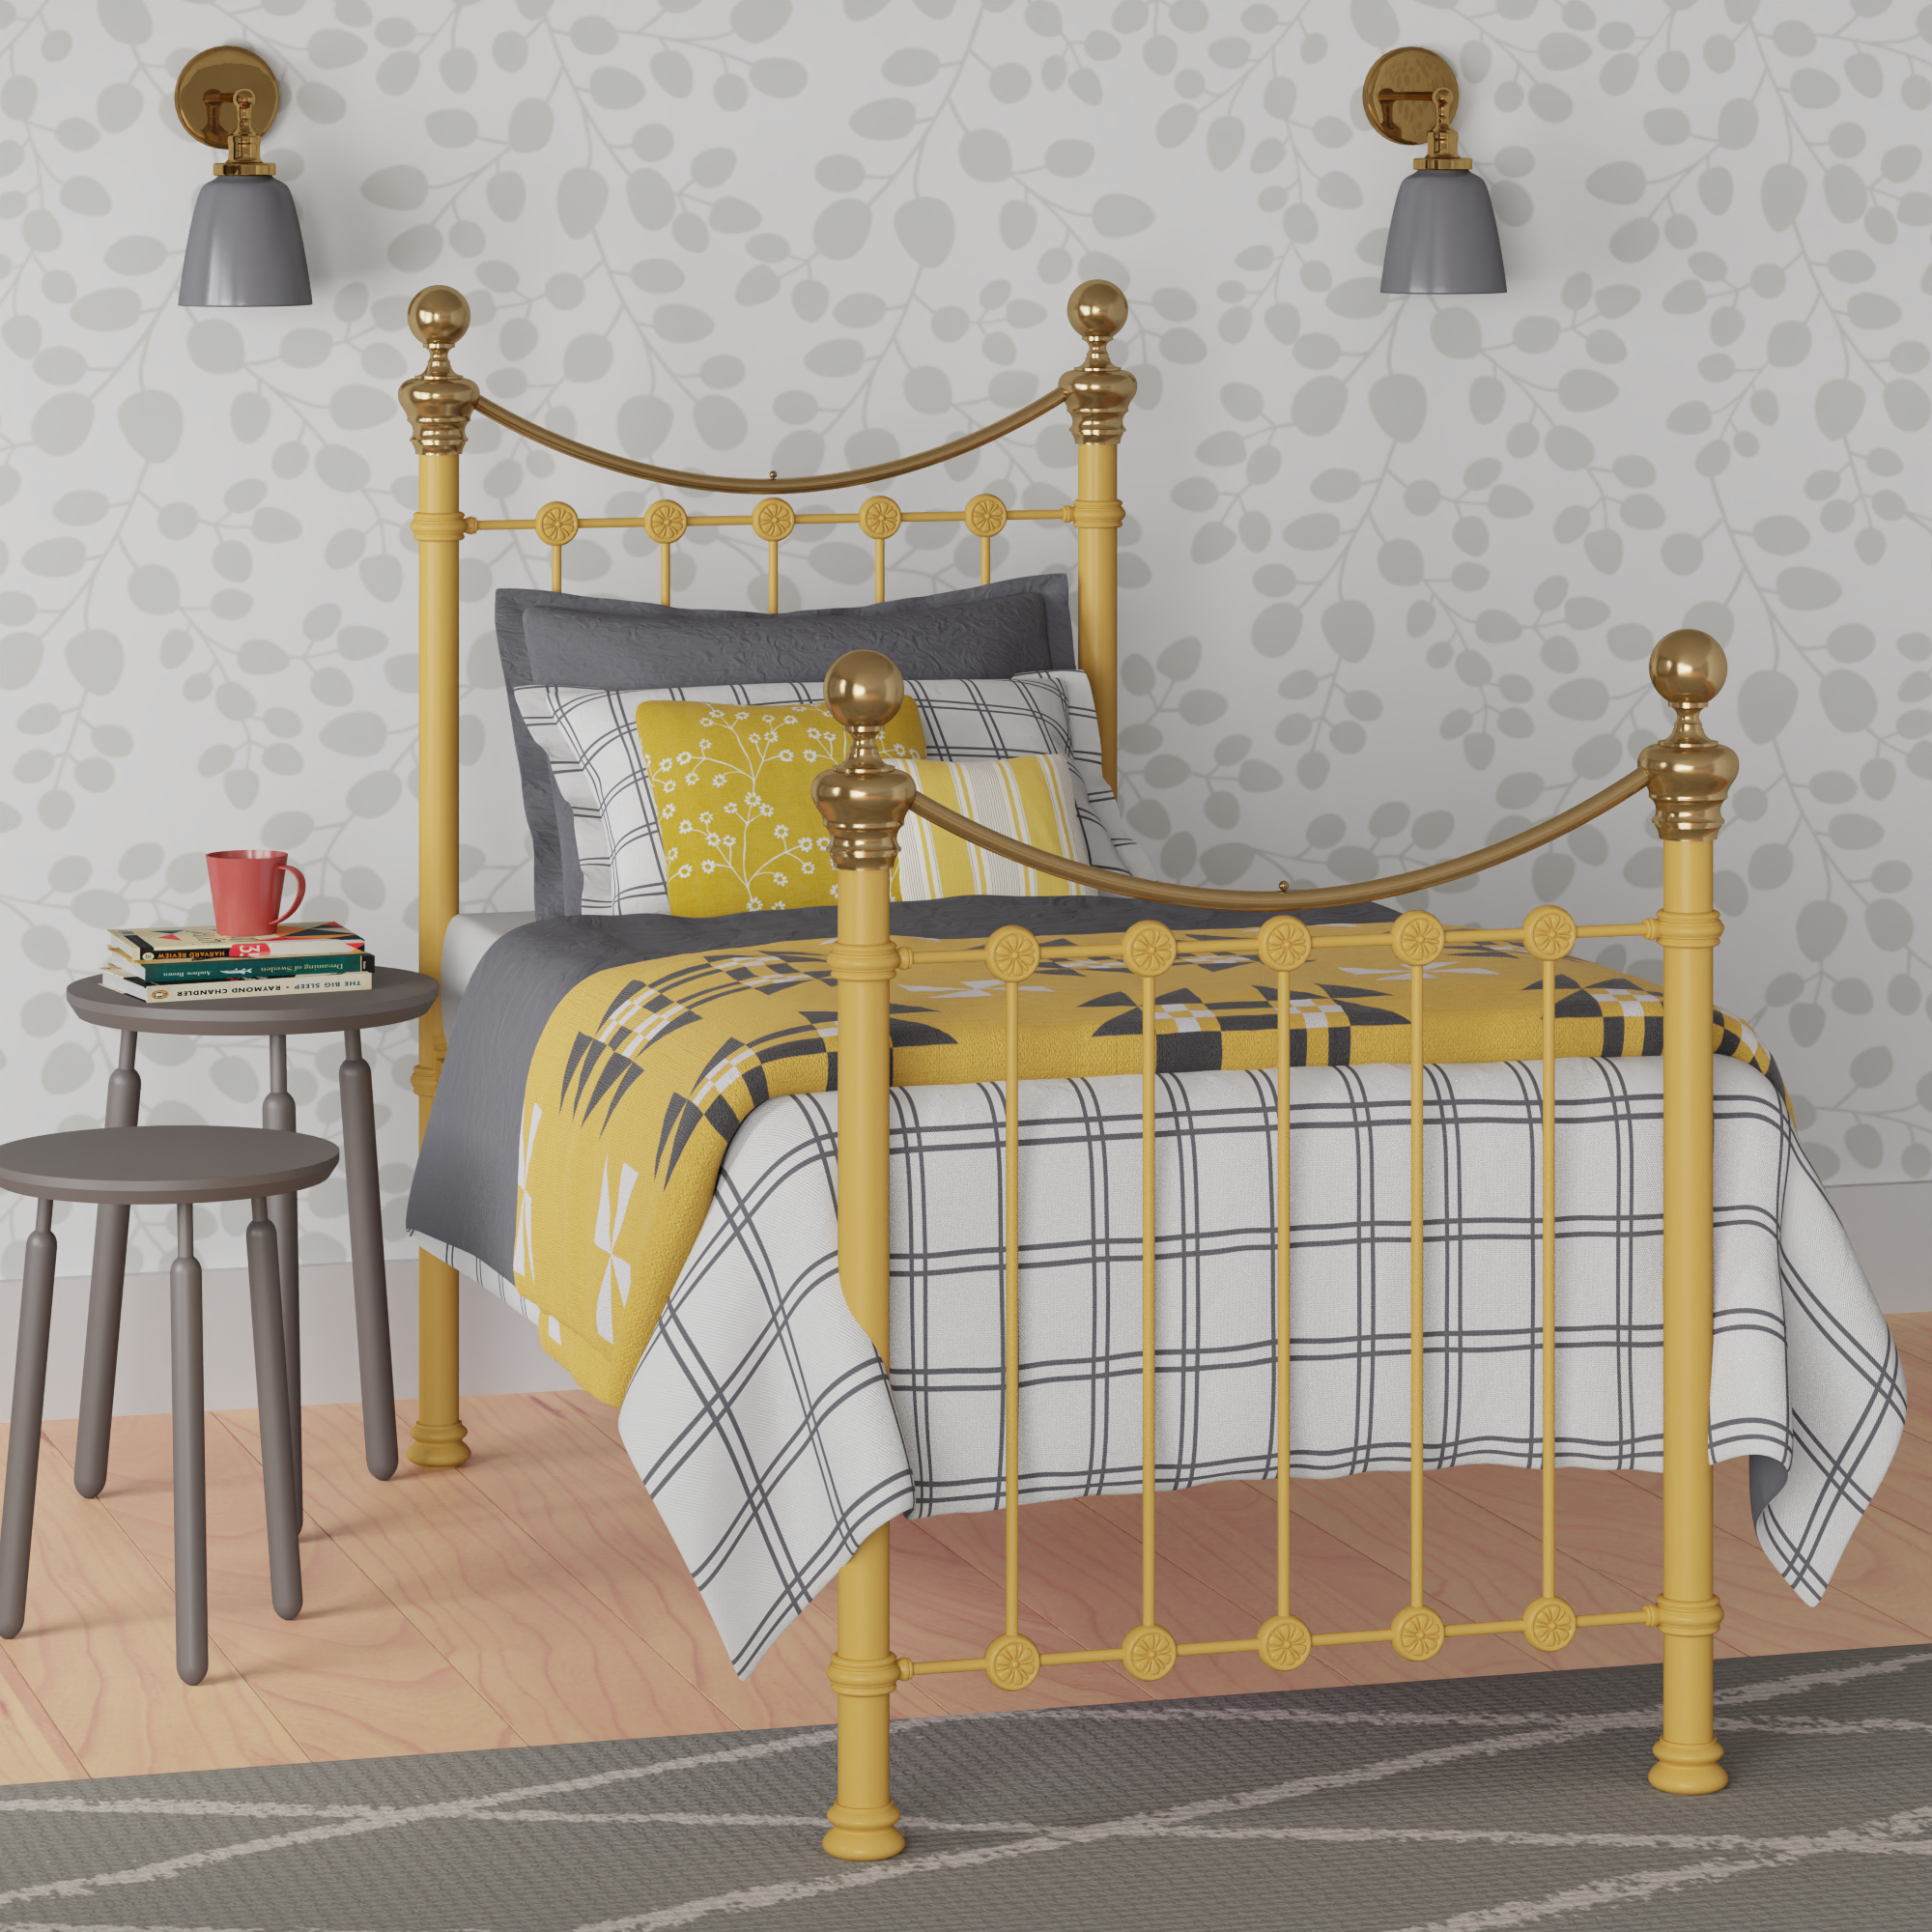 Selkirk iron bed in Yellow - Image yellow